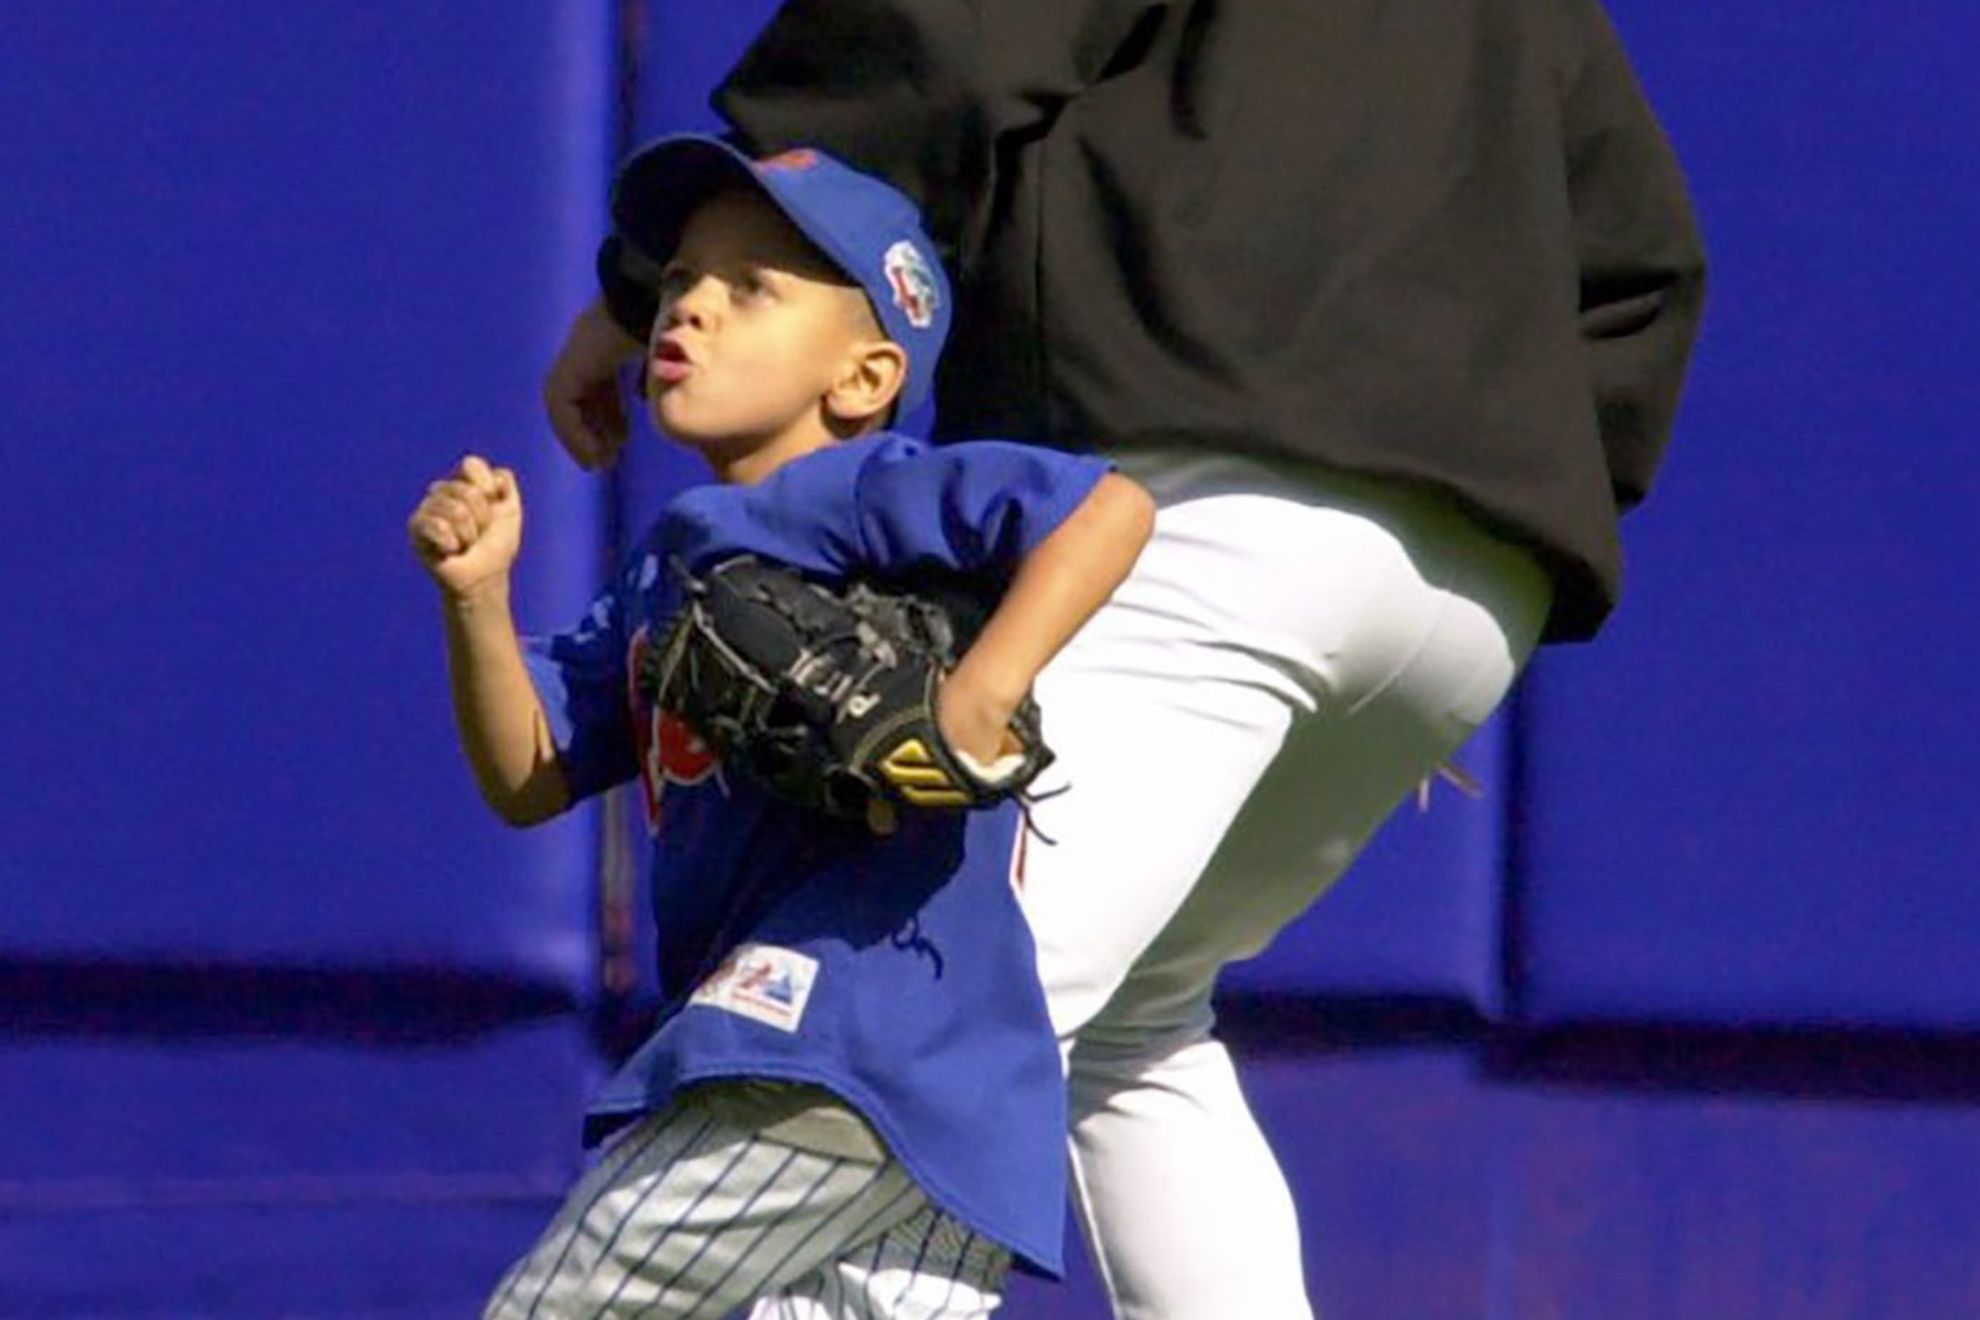 Clip of little Patrick Mahomes in Mets jersey batting with dad during World Series